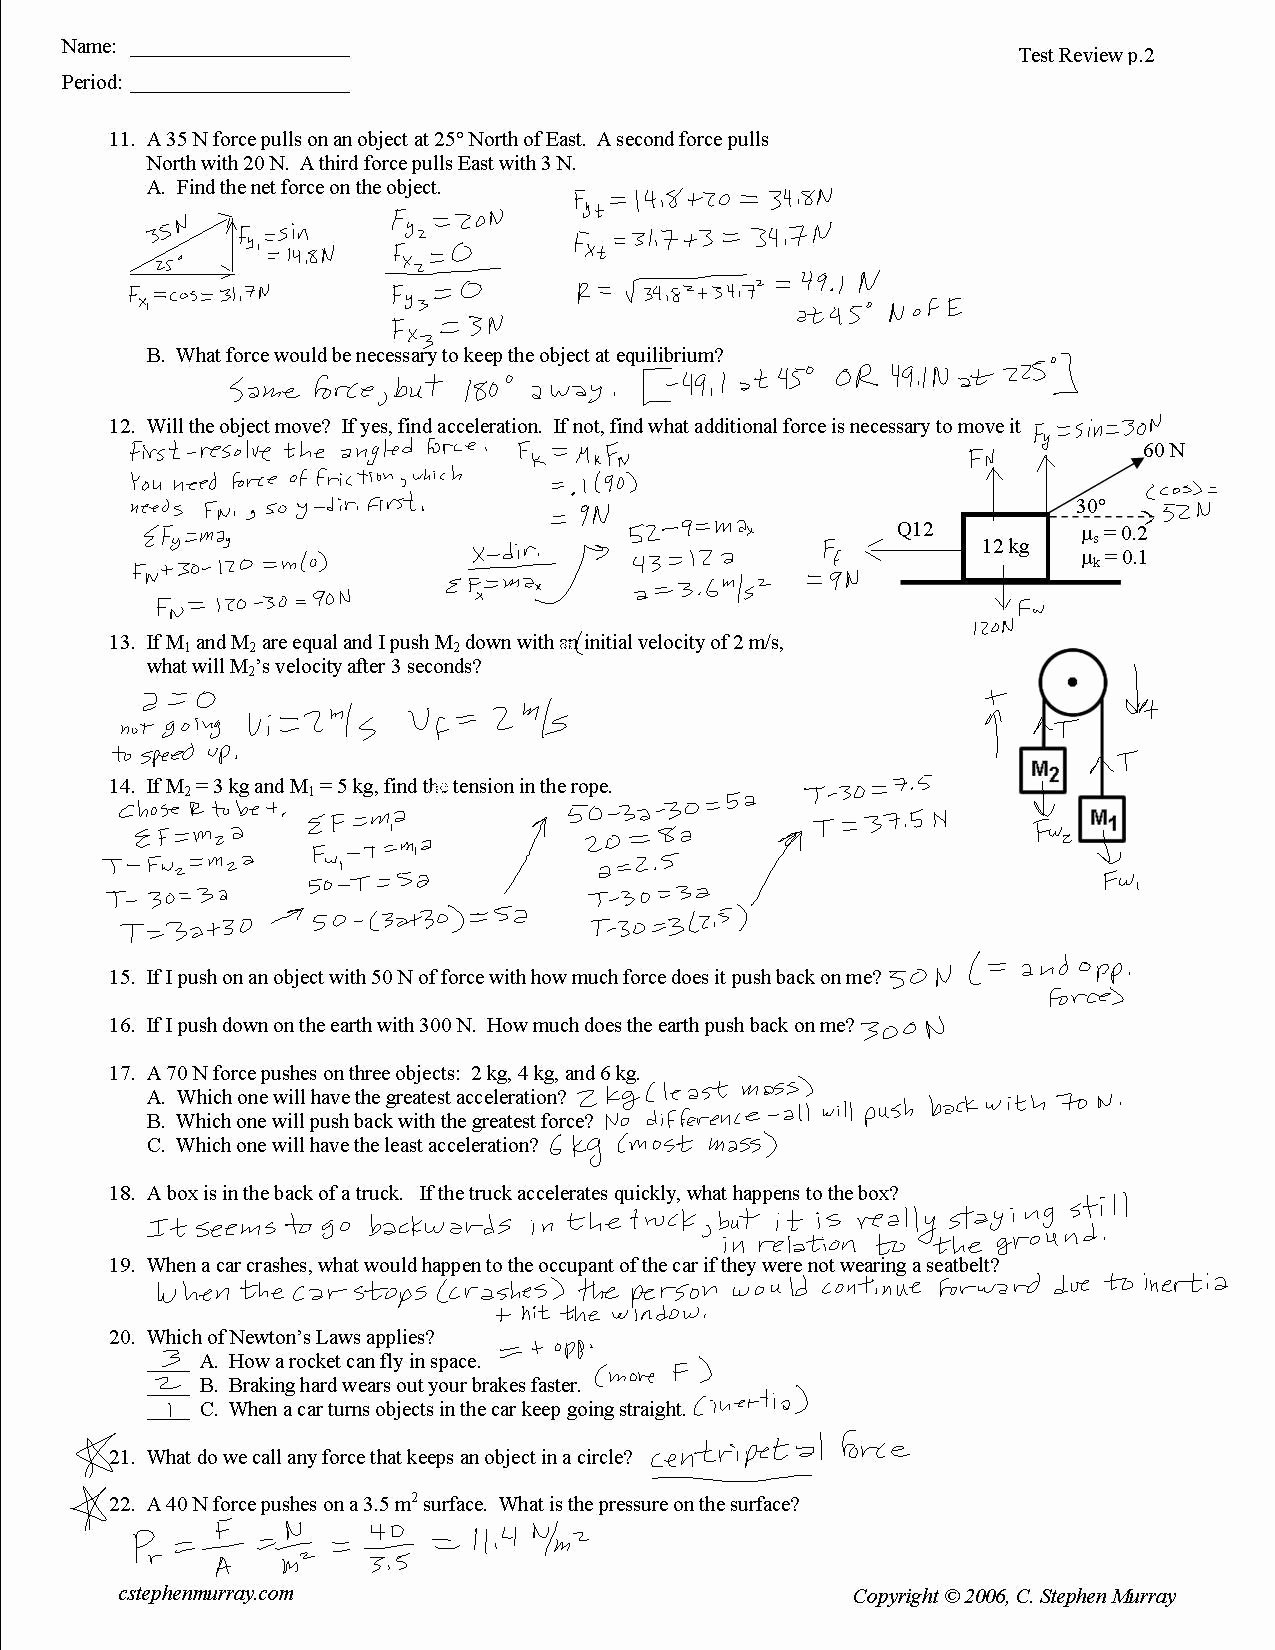 Newton&amp;#039;s Laws Review Worksheet Answers Awesome Unit I Worksheet 3 Coulombs Law Answers